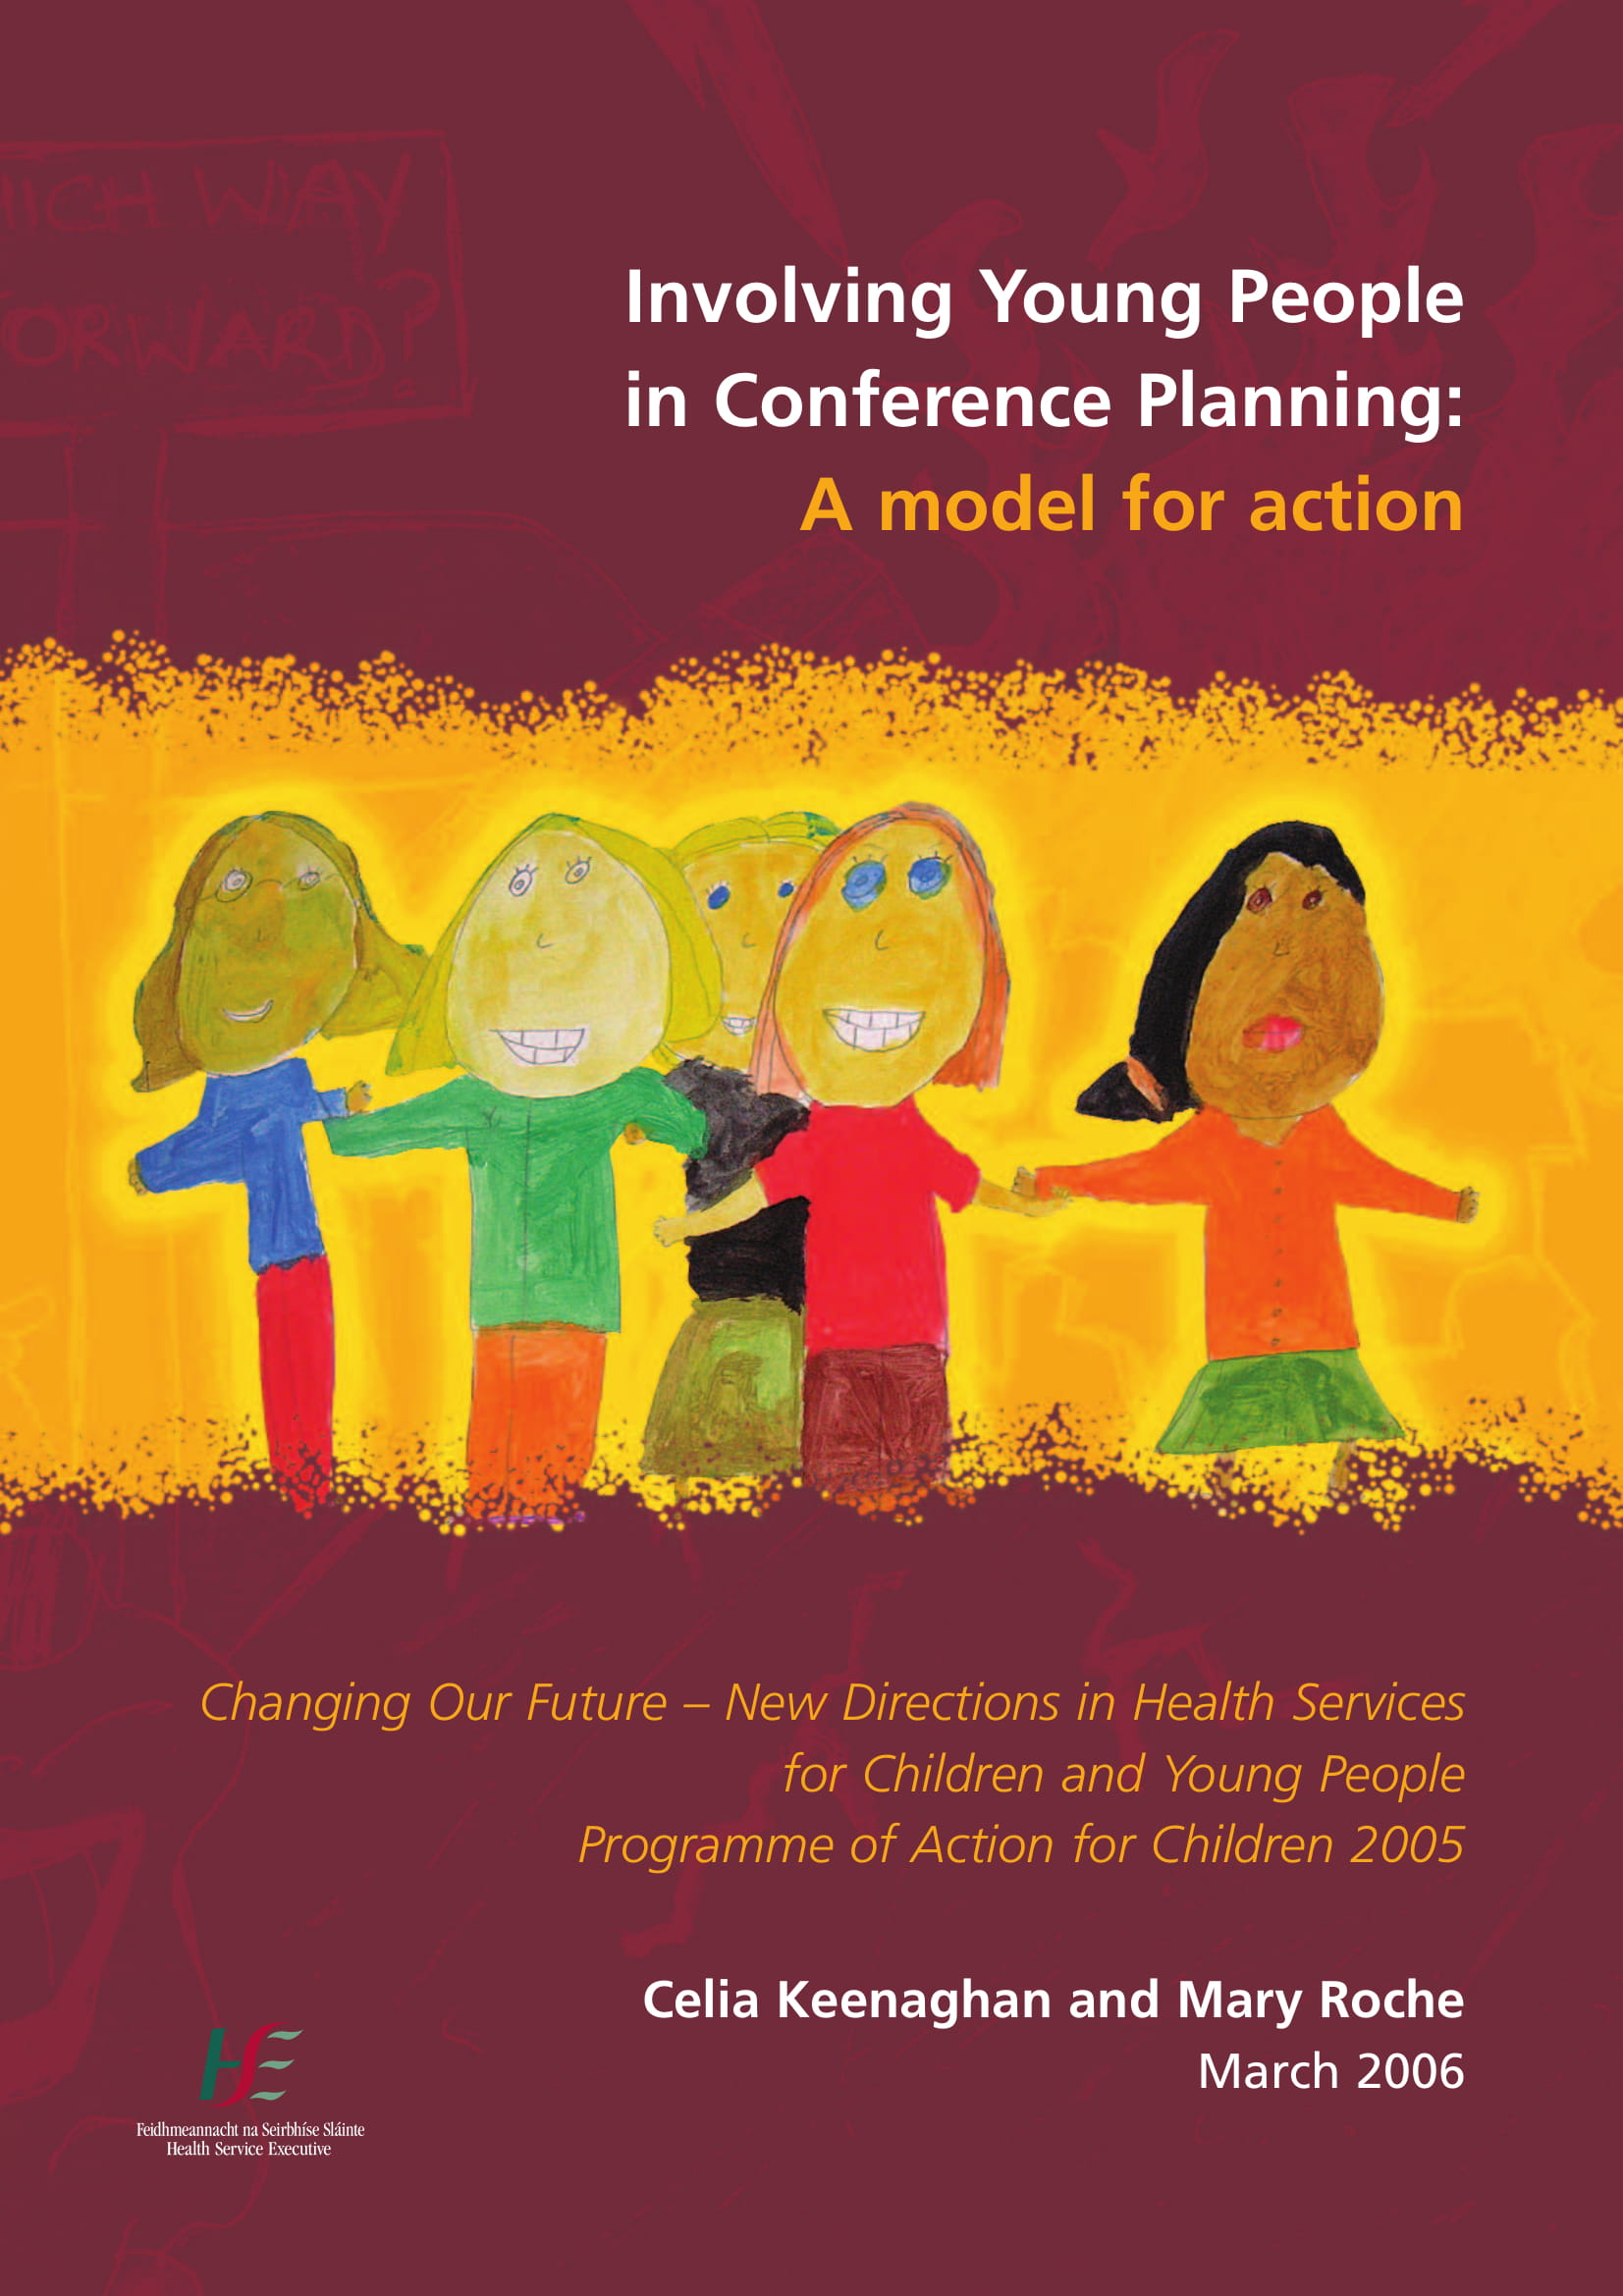 conference project planning example 01